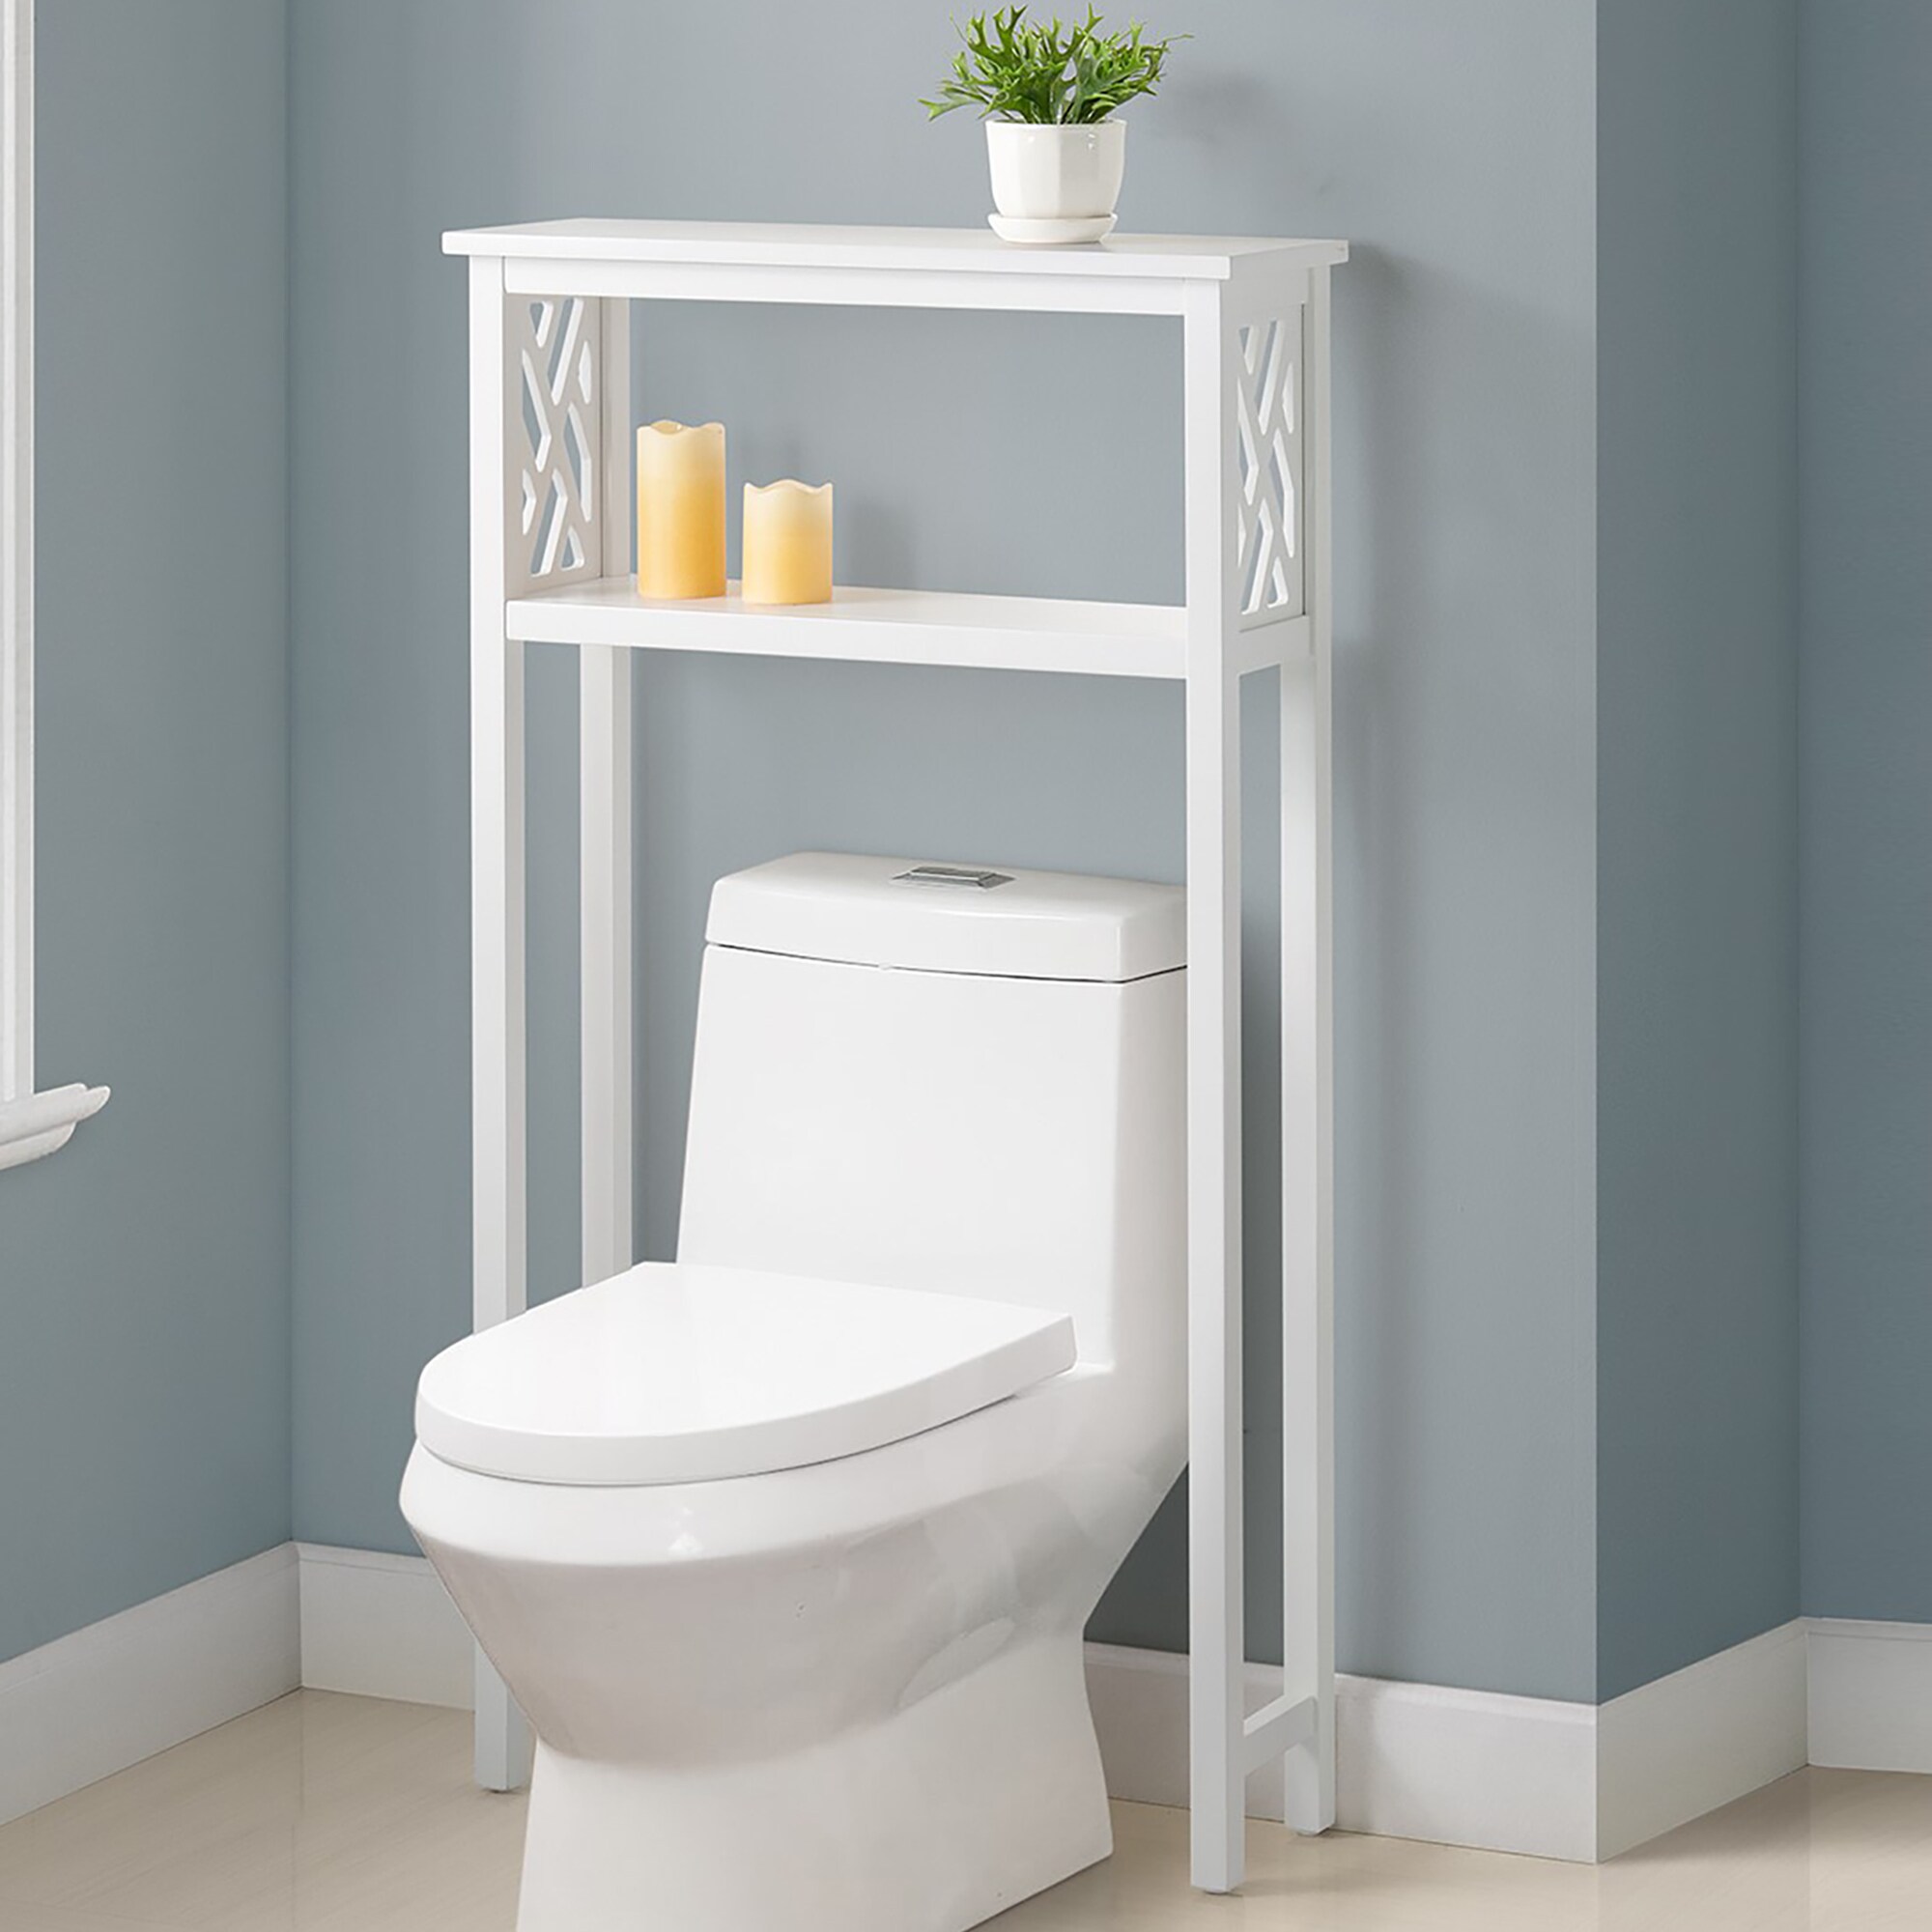 Alaterre Furniture Coventry 27inW x 48inH Bathroom Over Toilet Open Storage Shelf